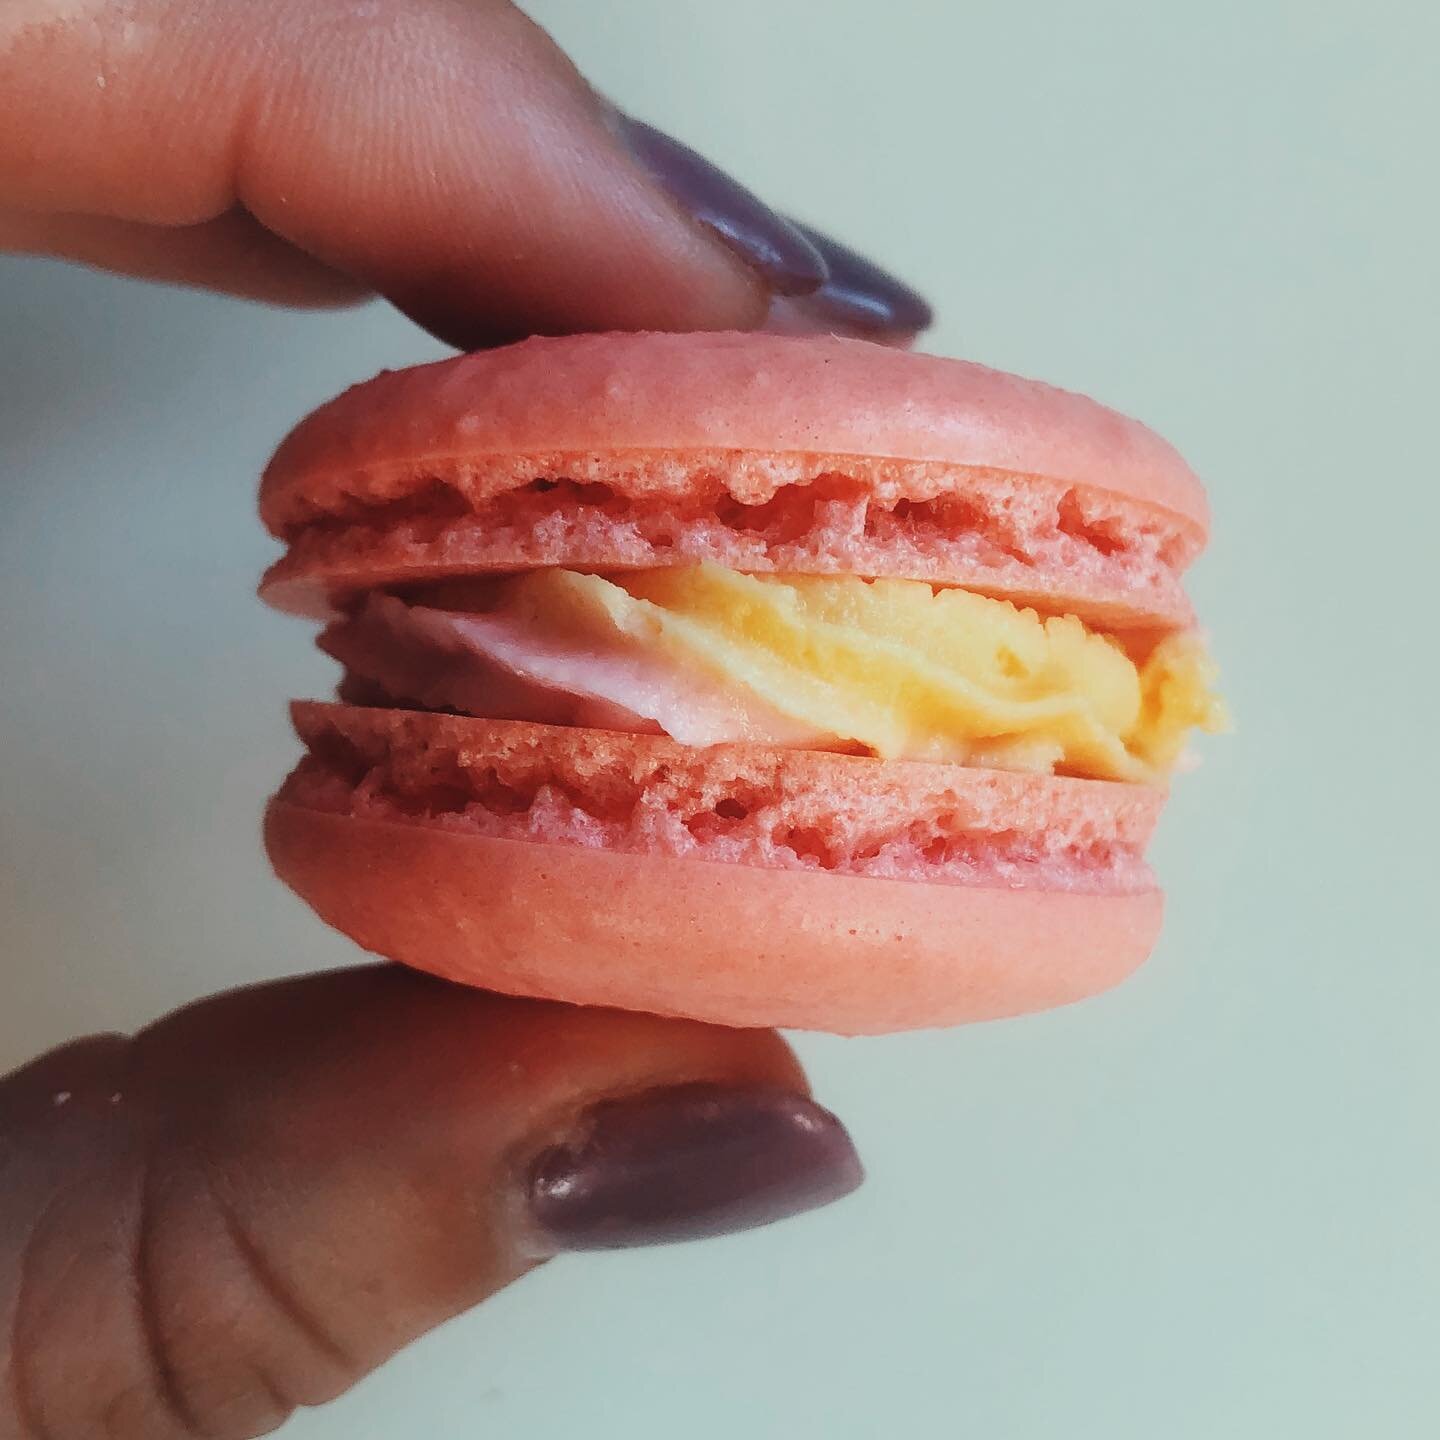 Strawberry Lemon Macs are an unexpected fav. So refreshing and tasty🤤